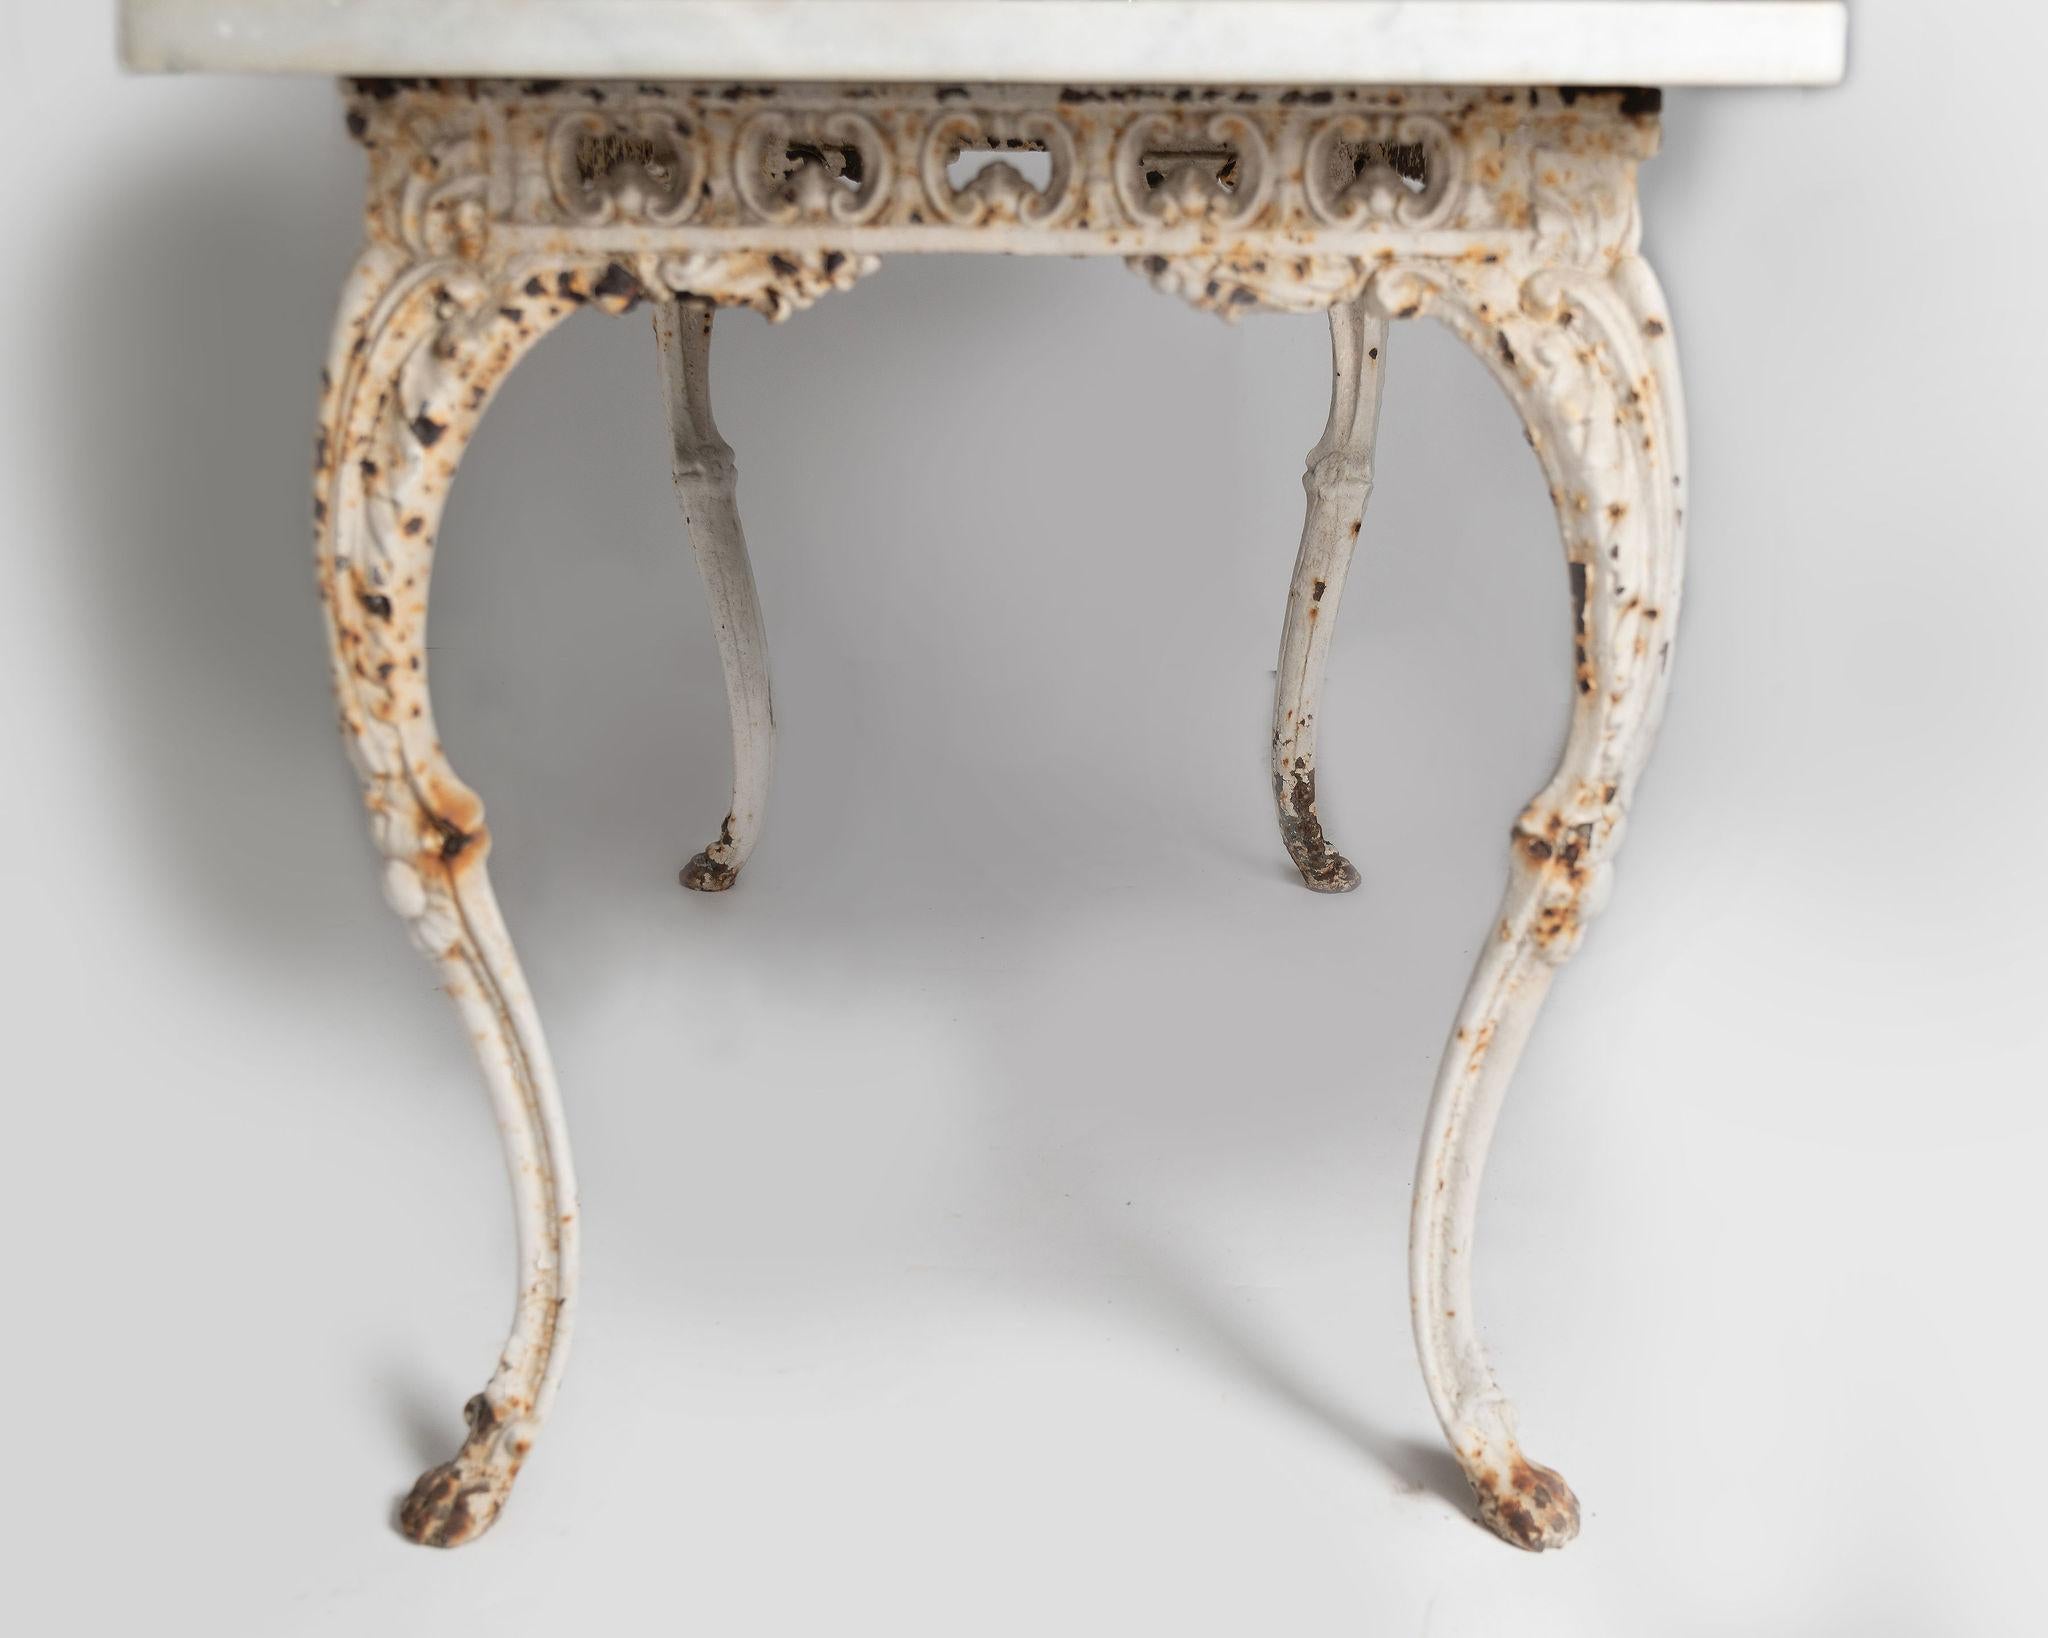 19th Century Napoleon III period openwork cast iron table with carrara marble top. Delightful lion paw feet, original paint. Detail to all four sides. Light age related wear, marks to the marble as to be expected. The base is separate to the top.